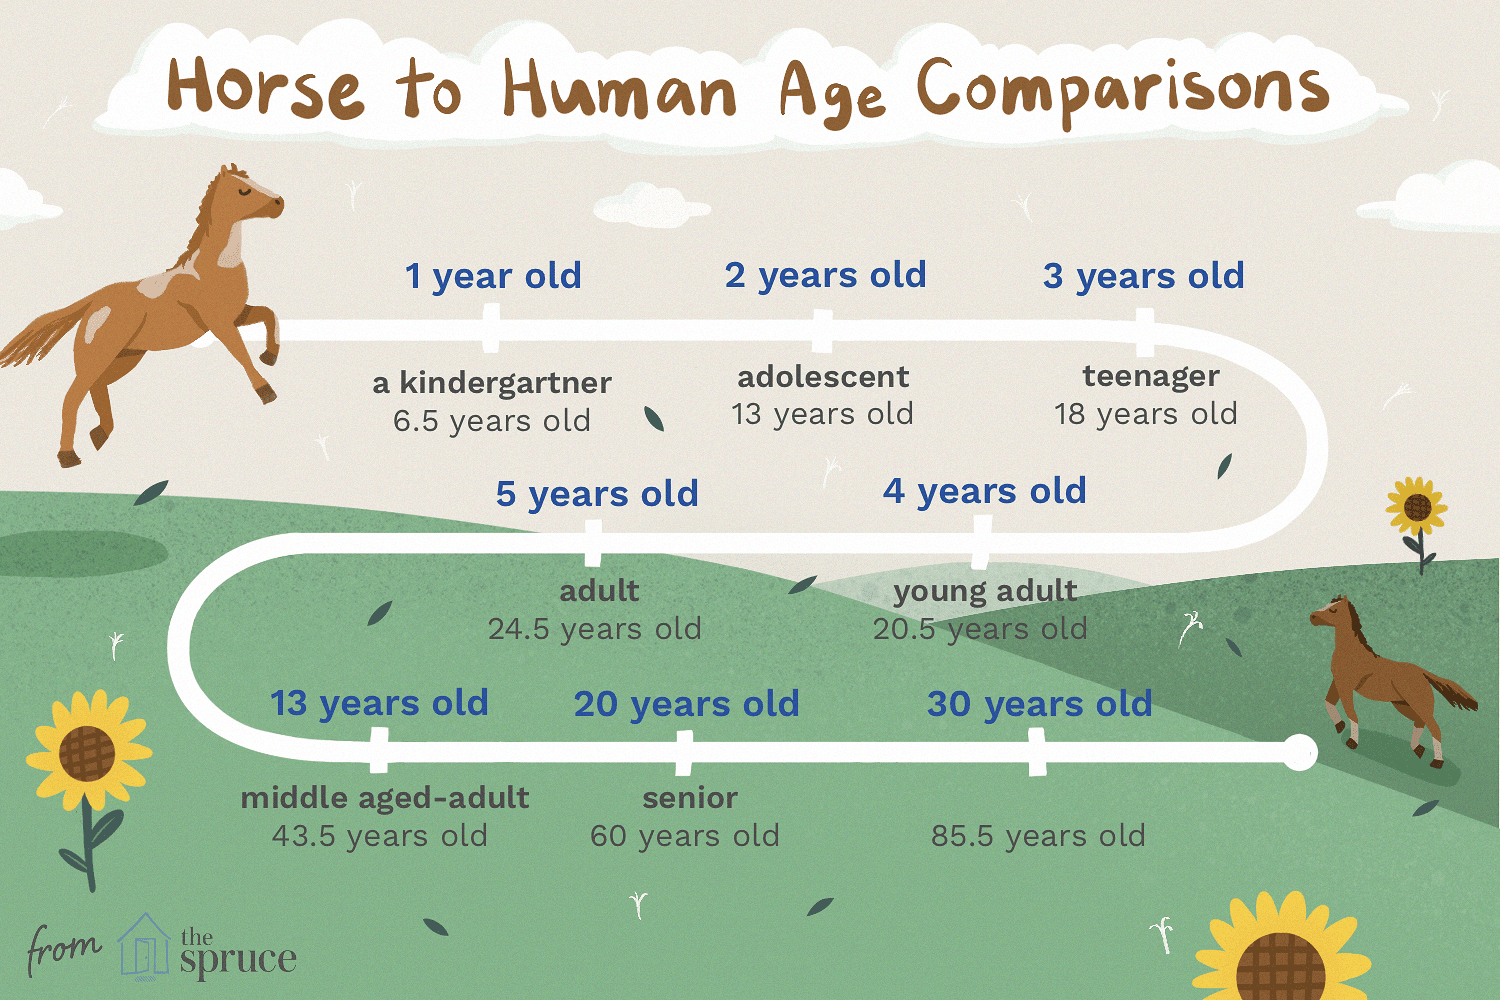 horse to human age comparisons illustration